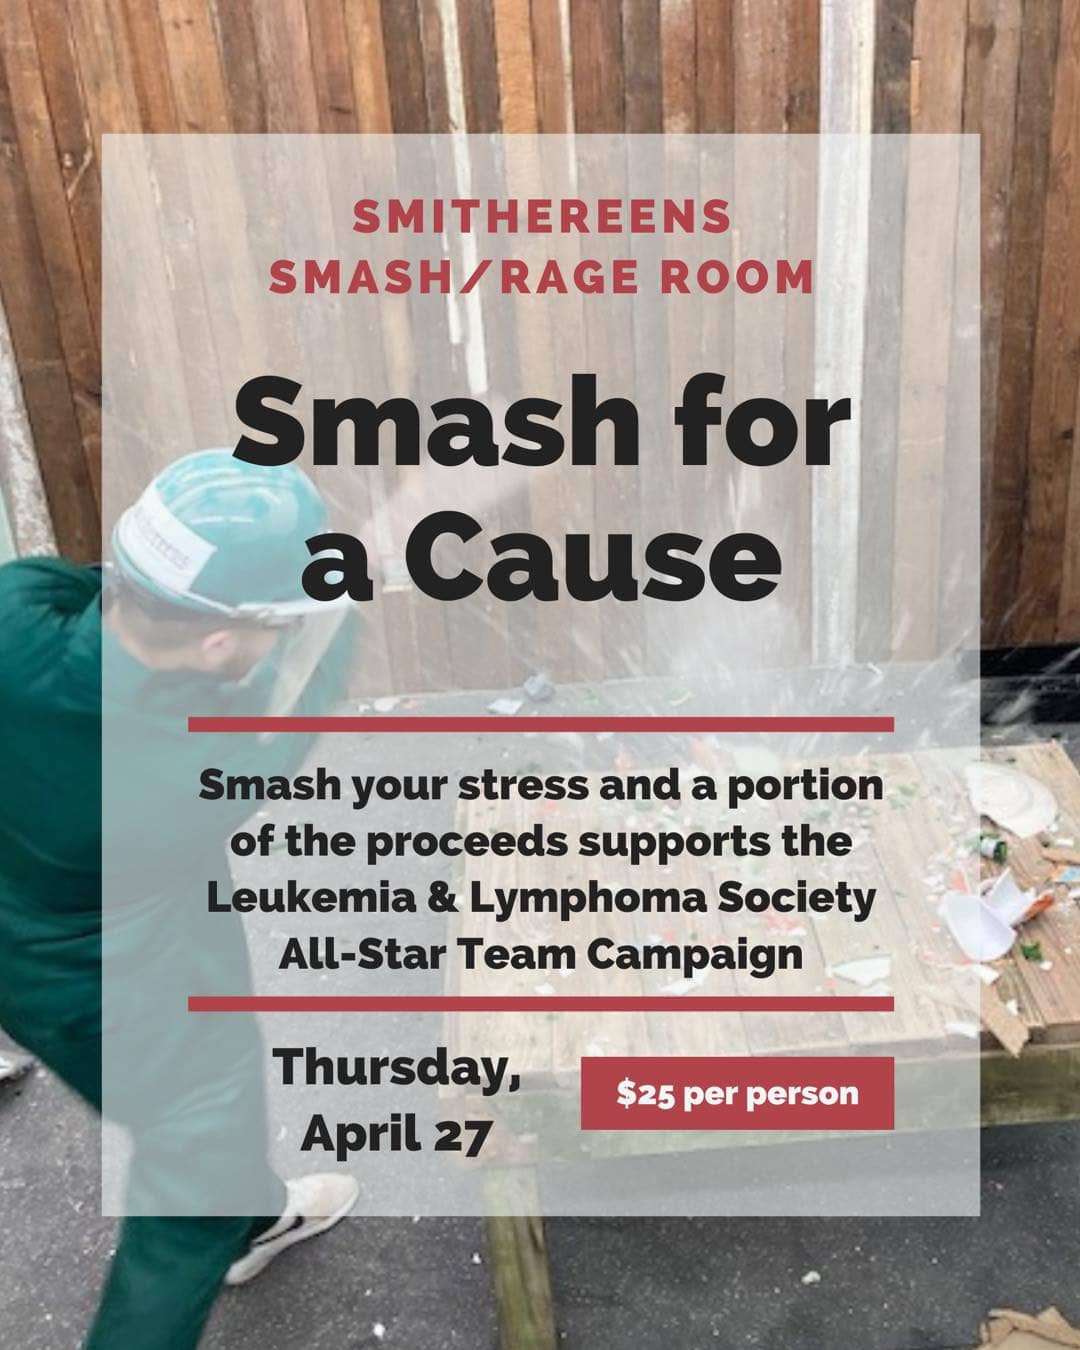 Smash for a Cause